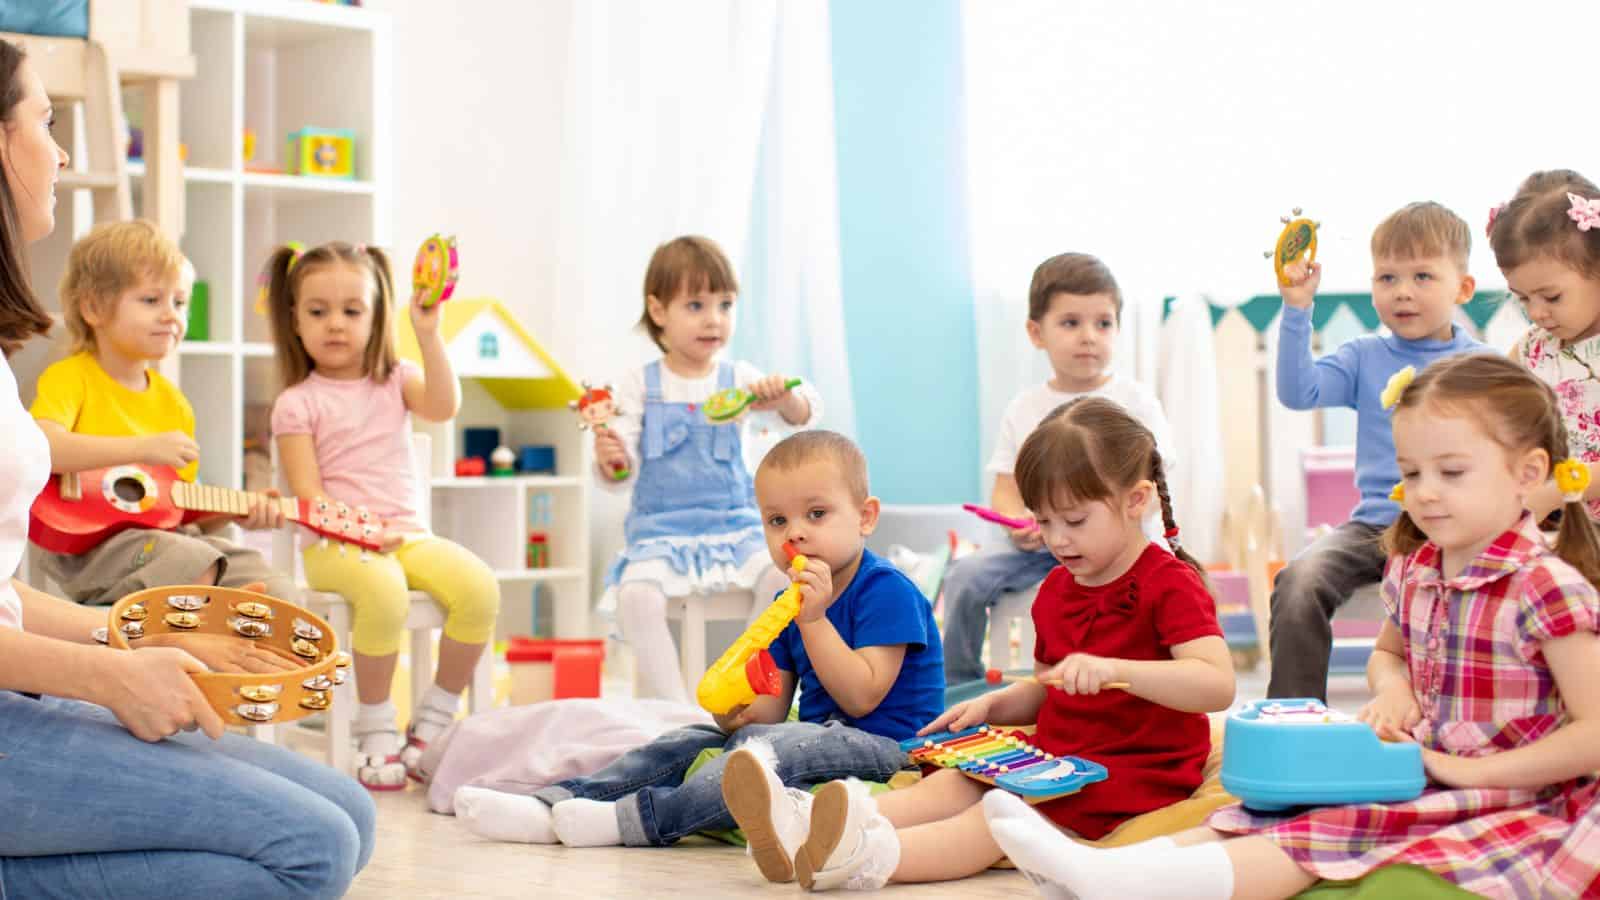 <p>Flu viruses quickly spread around daycares. This is because little children don’t know how to stop the spread of germs. When they sneeze and cough without covering their mouths, illnesses spread very quickly.</p>